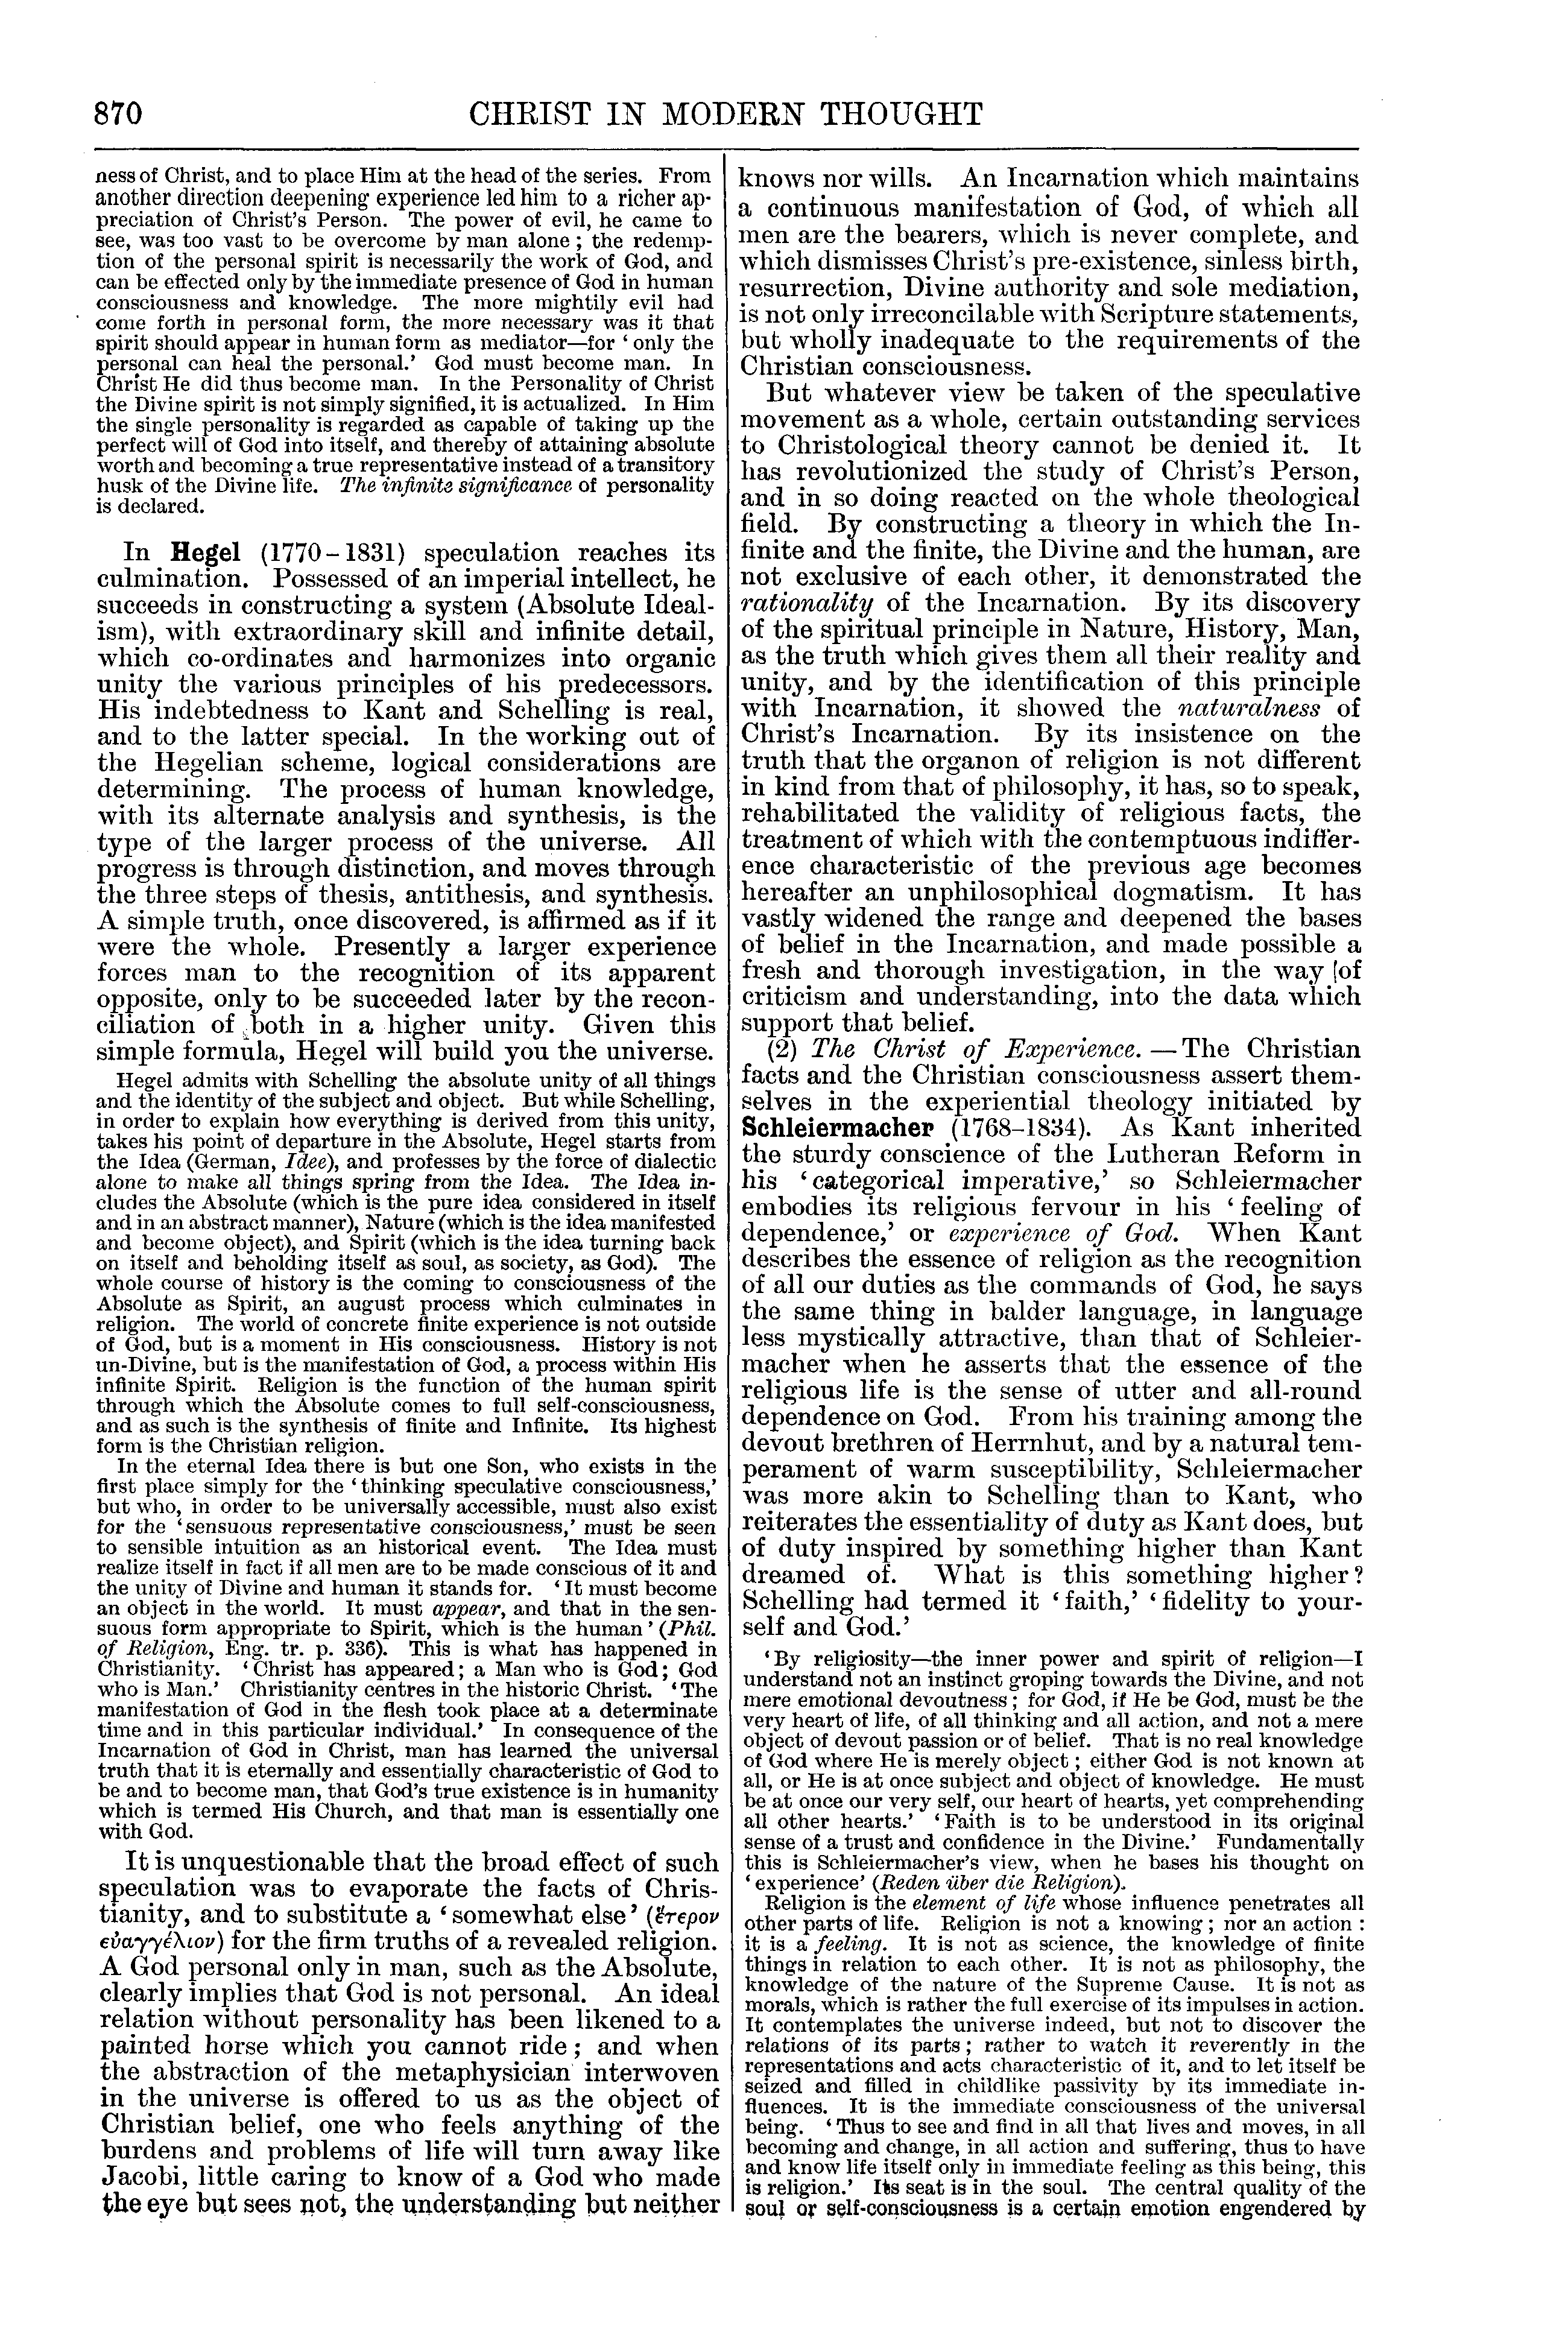 Image of page 870